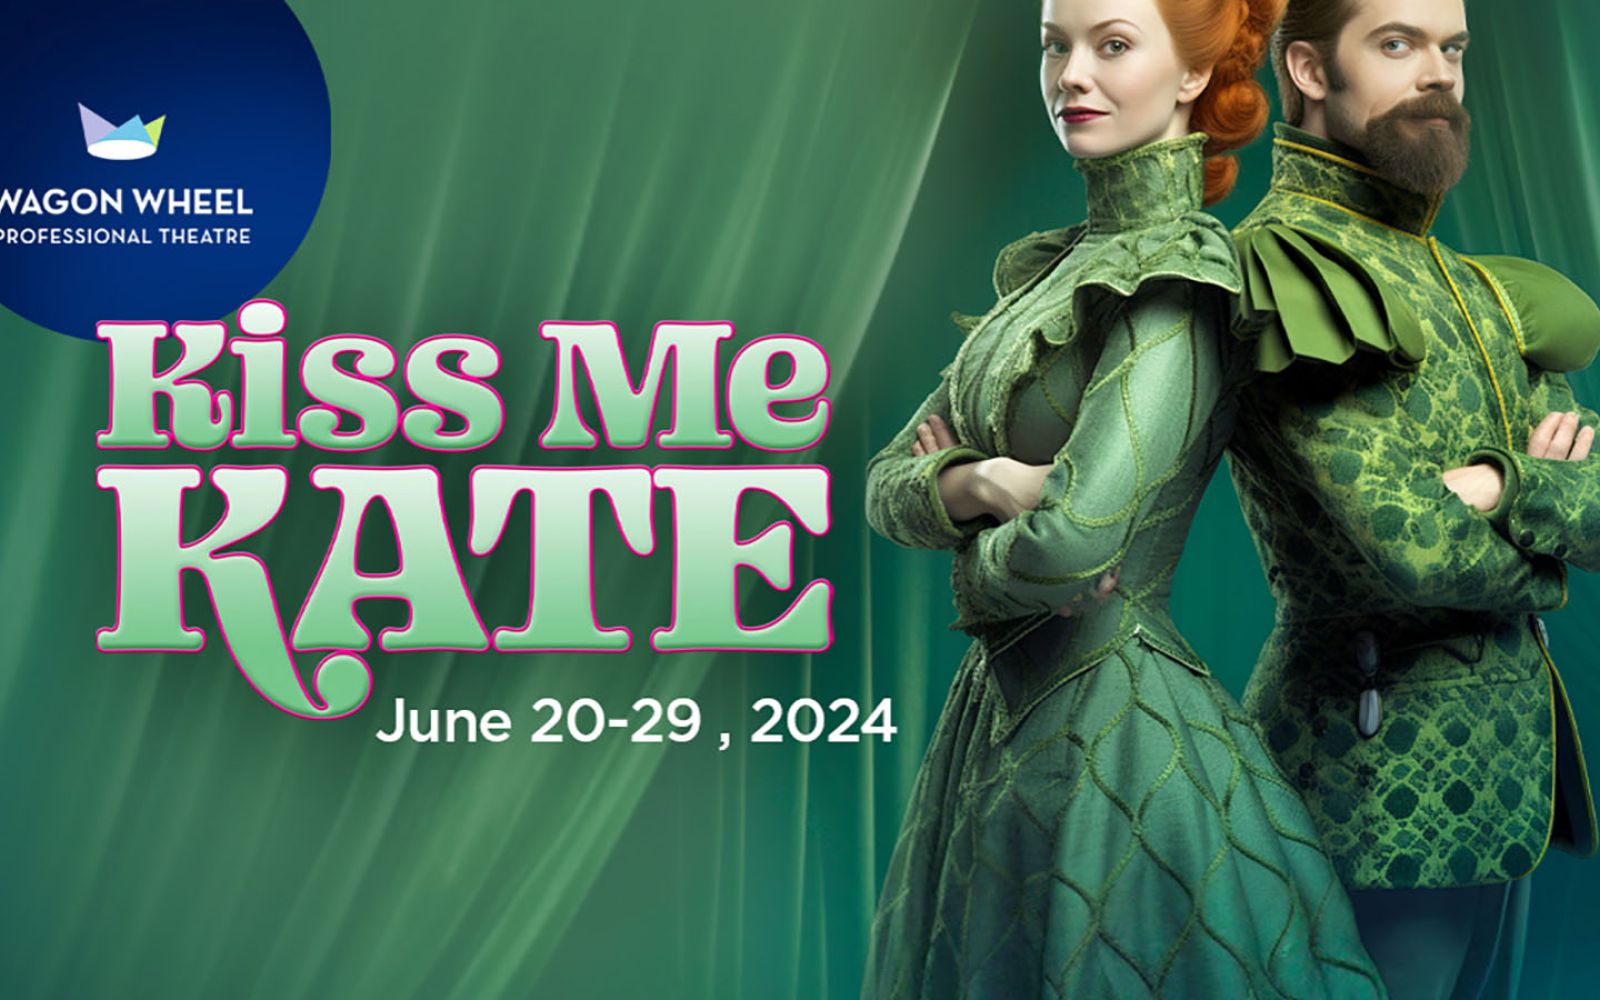 The Wagon Wheel Professional Theatre will present Kiss Me, Kate from June 20-29.